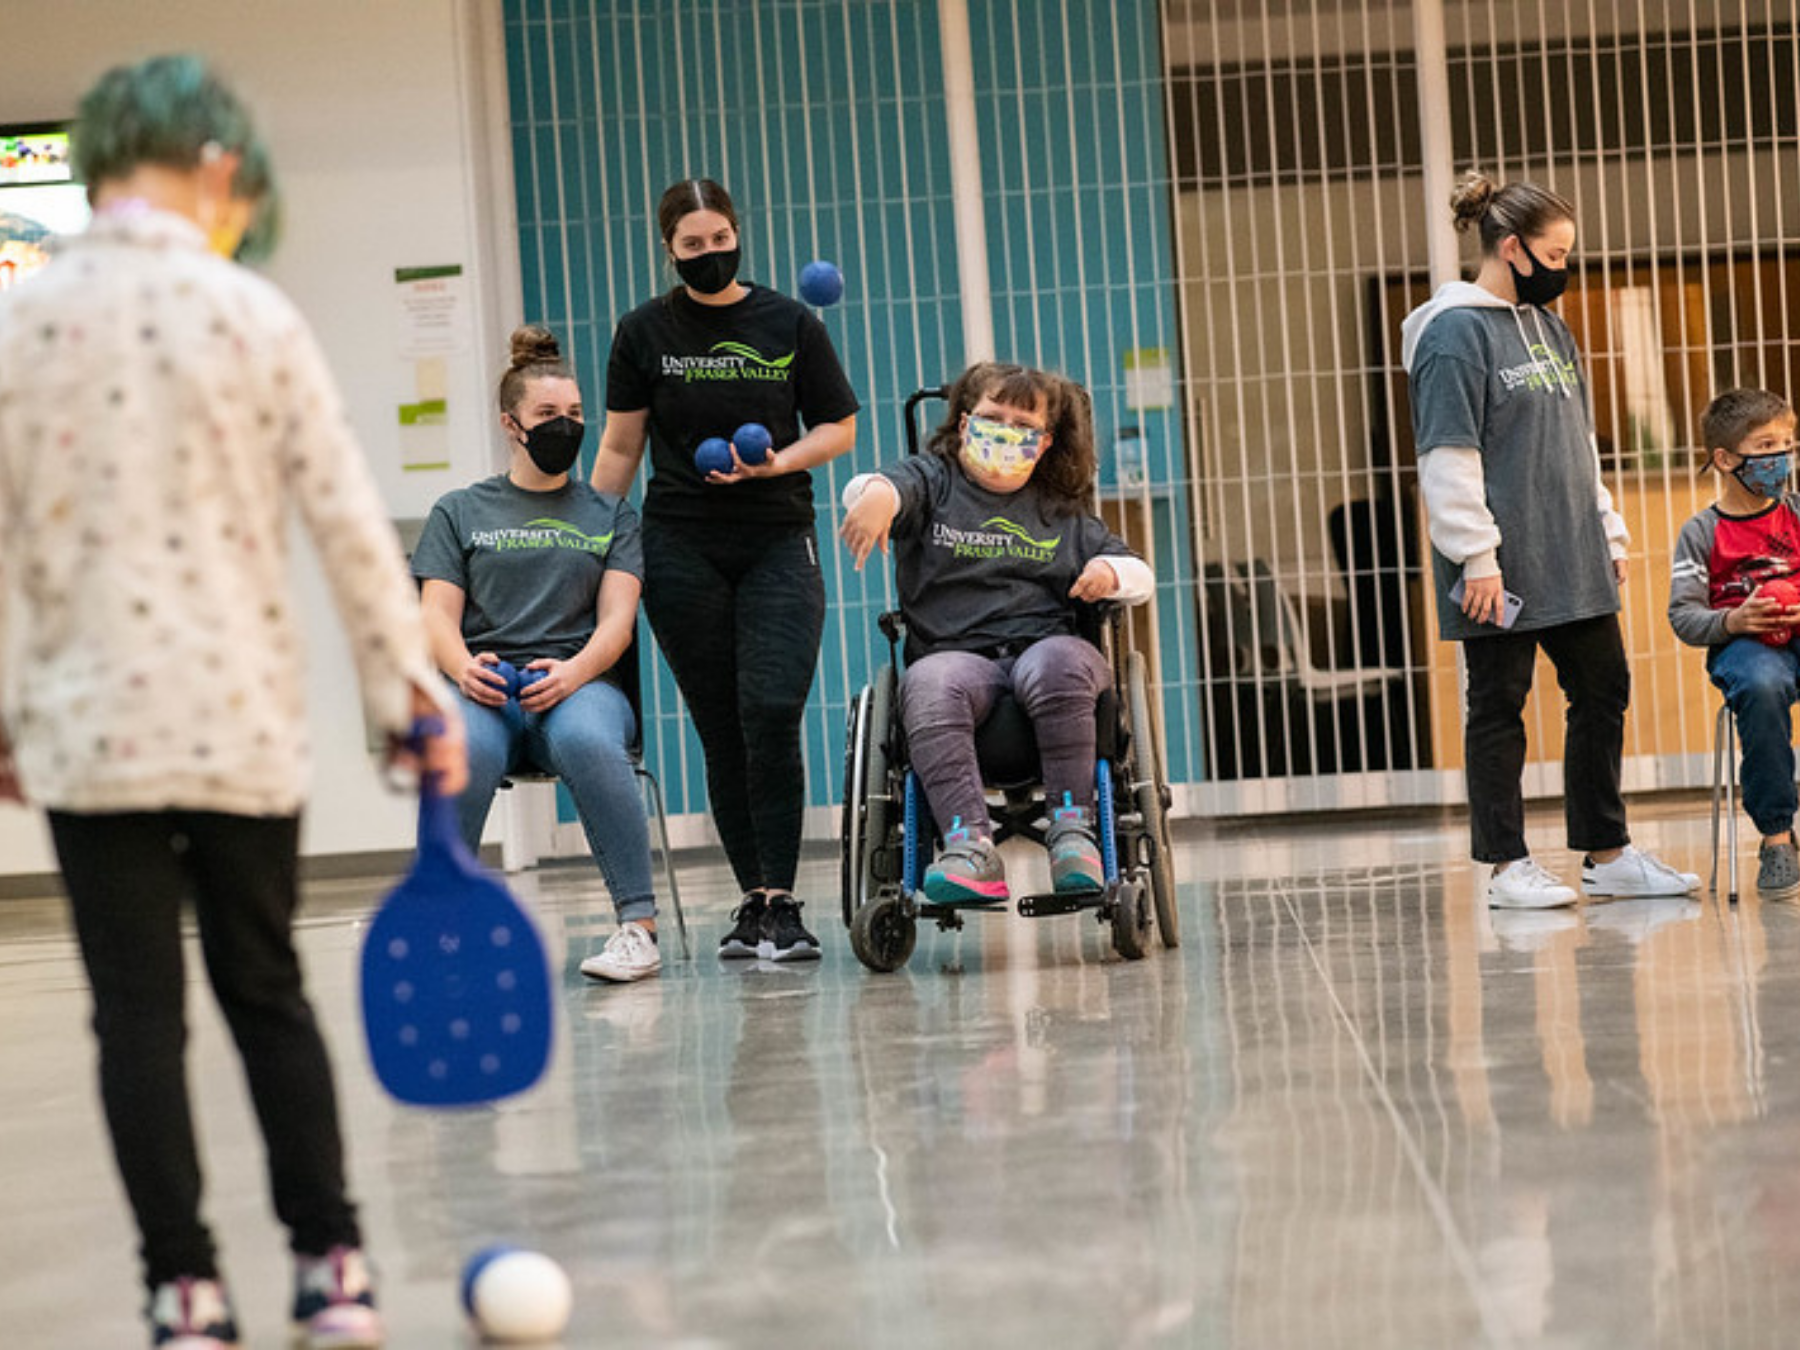 Kinesiology students help deliver a boccia program in British Columbia’s Fraser Valley